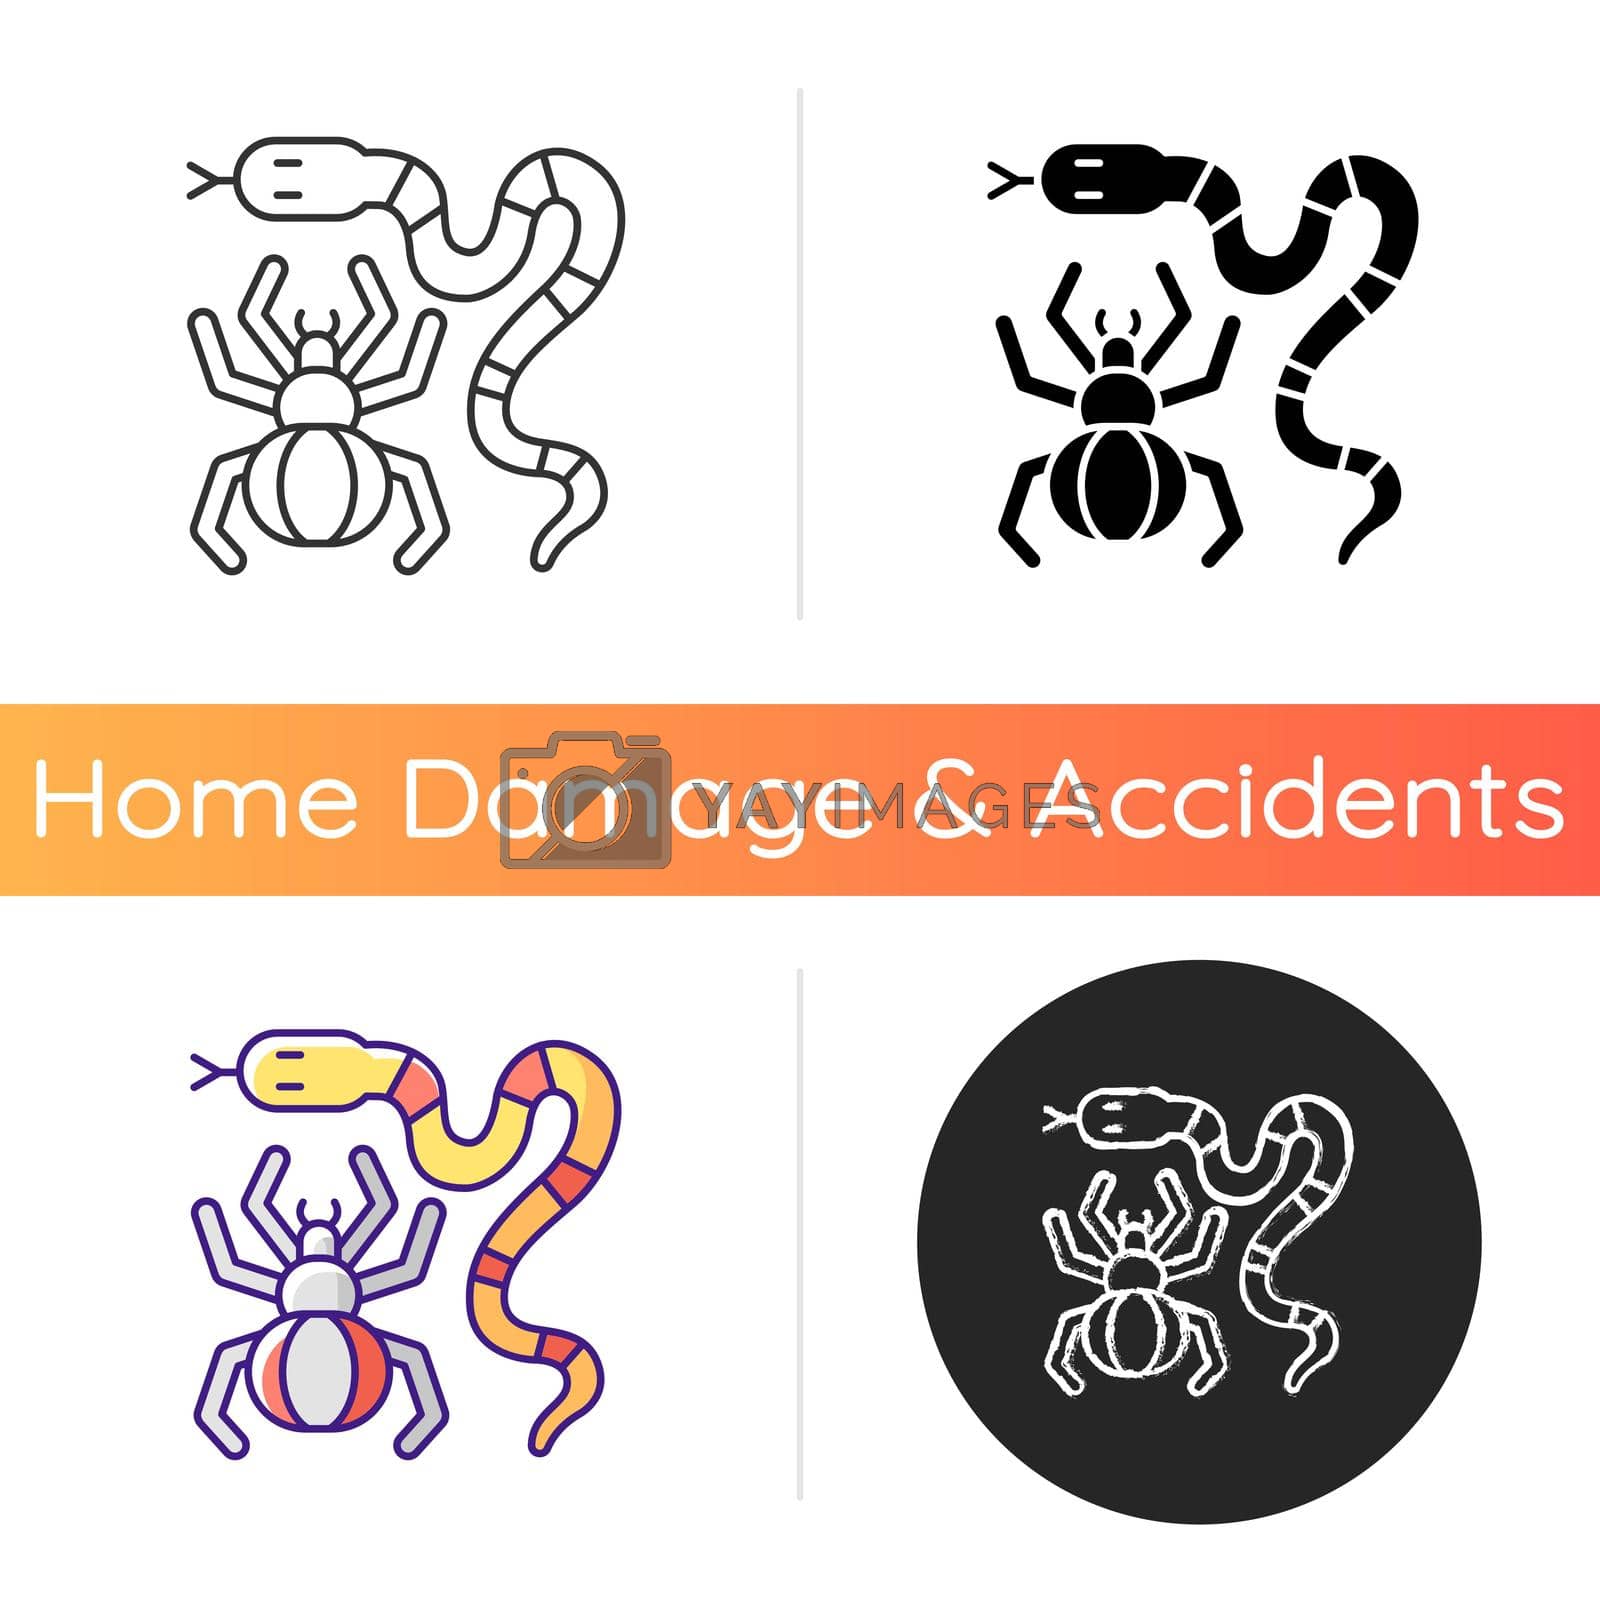 Dangerous animals icon. Exotic pets. Poisonous snakes and venomous spiders. Cobras, vipers and rattlesnakes. Wildlife home invaders. Linear black and RGB color styles. Isolated vector illustrations